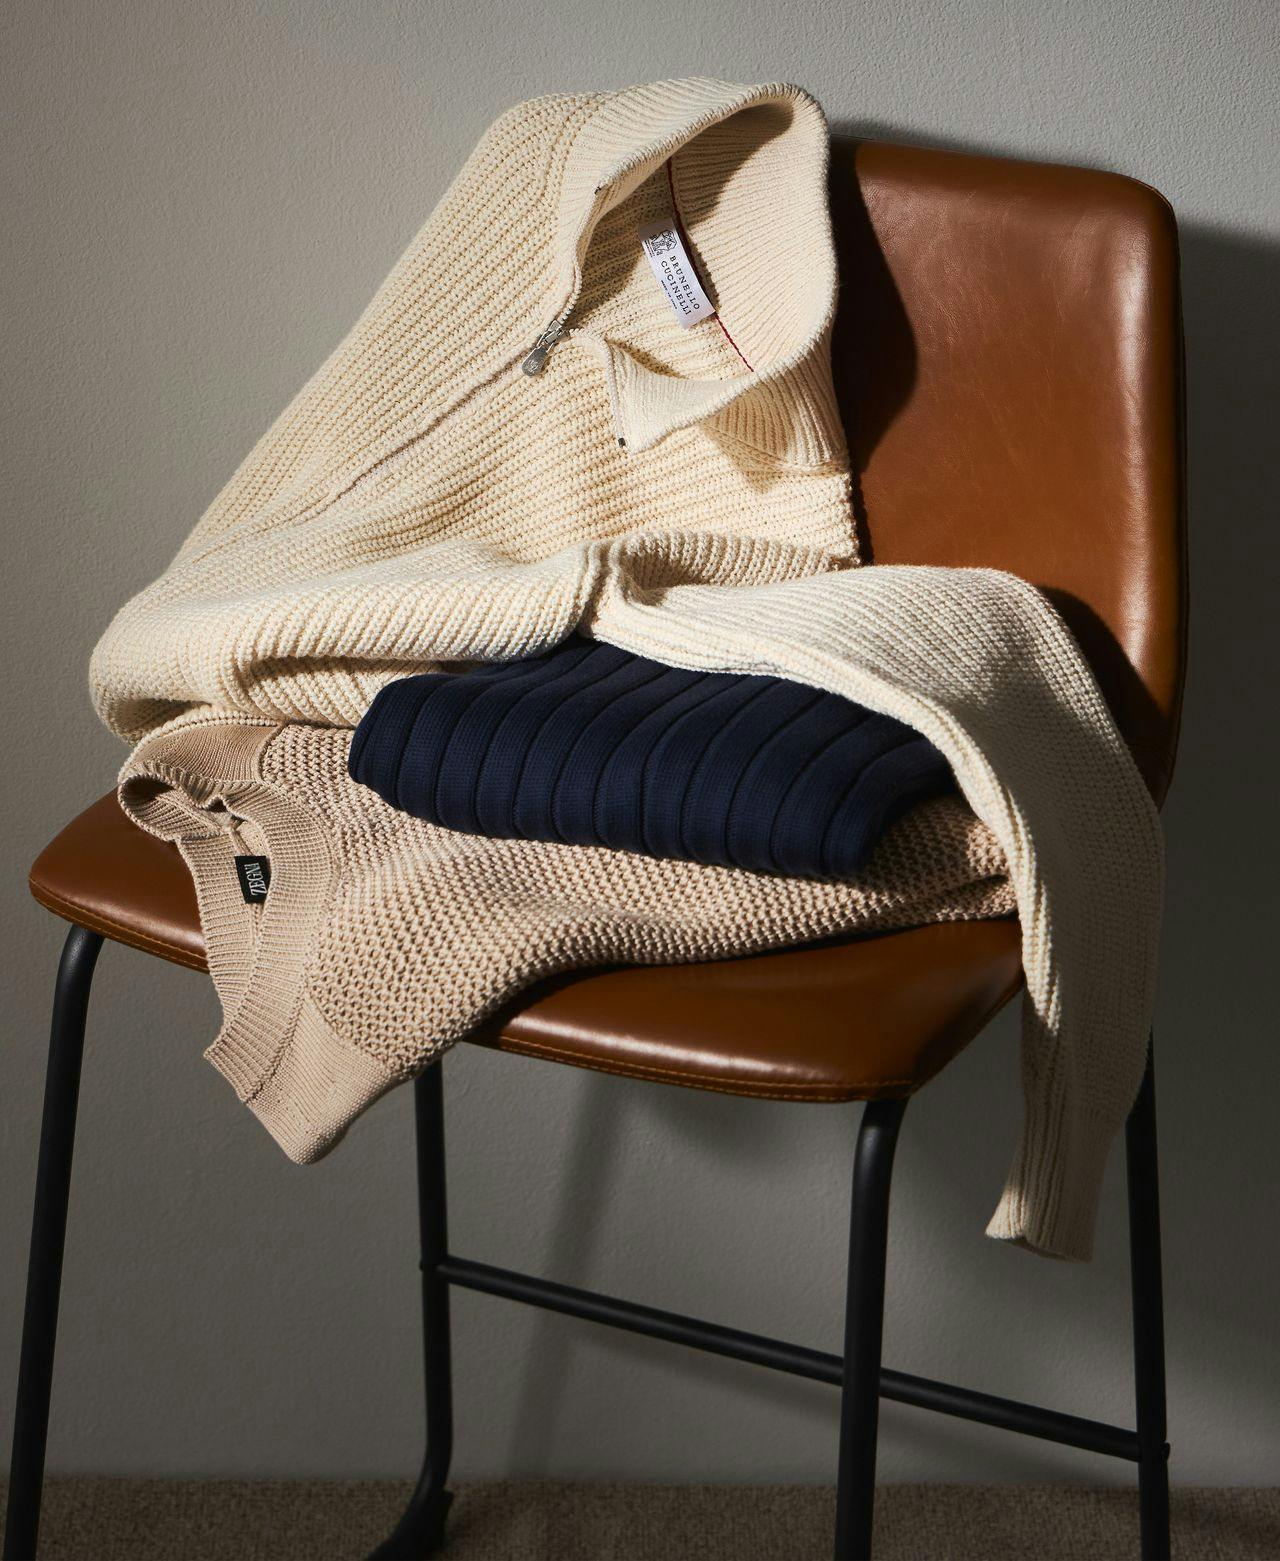 three knit sweaters folded on brown chair